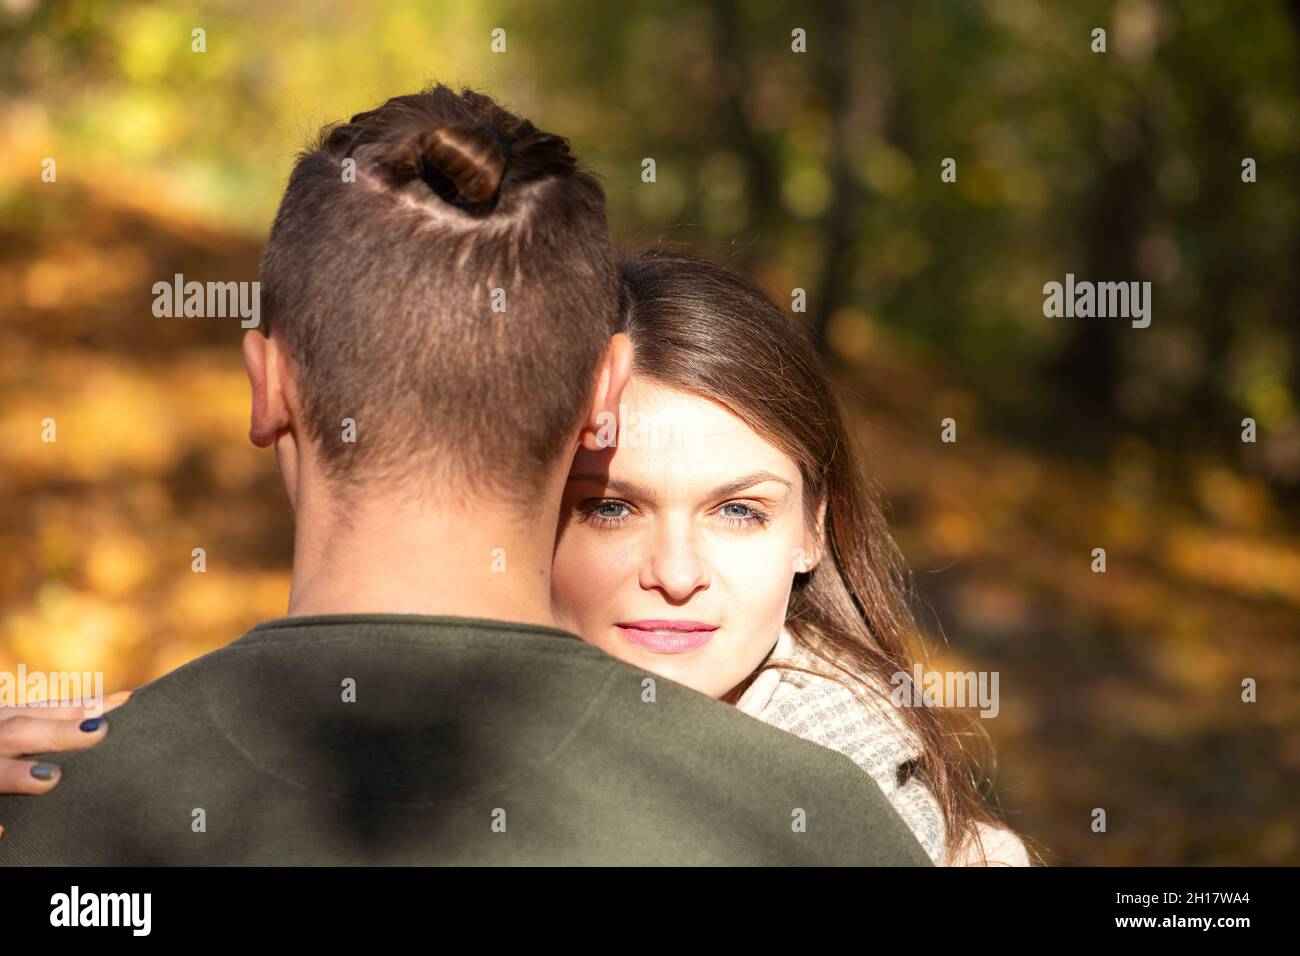 Love, leisure, nature, relationship concept. Beautiful brunette woman with pink lipstick and illuminated face by sunlight hugging man in yellow autumn Stock Photo